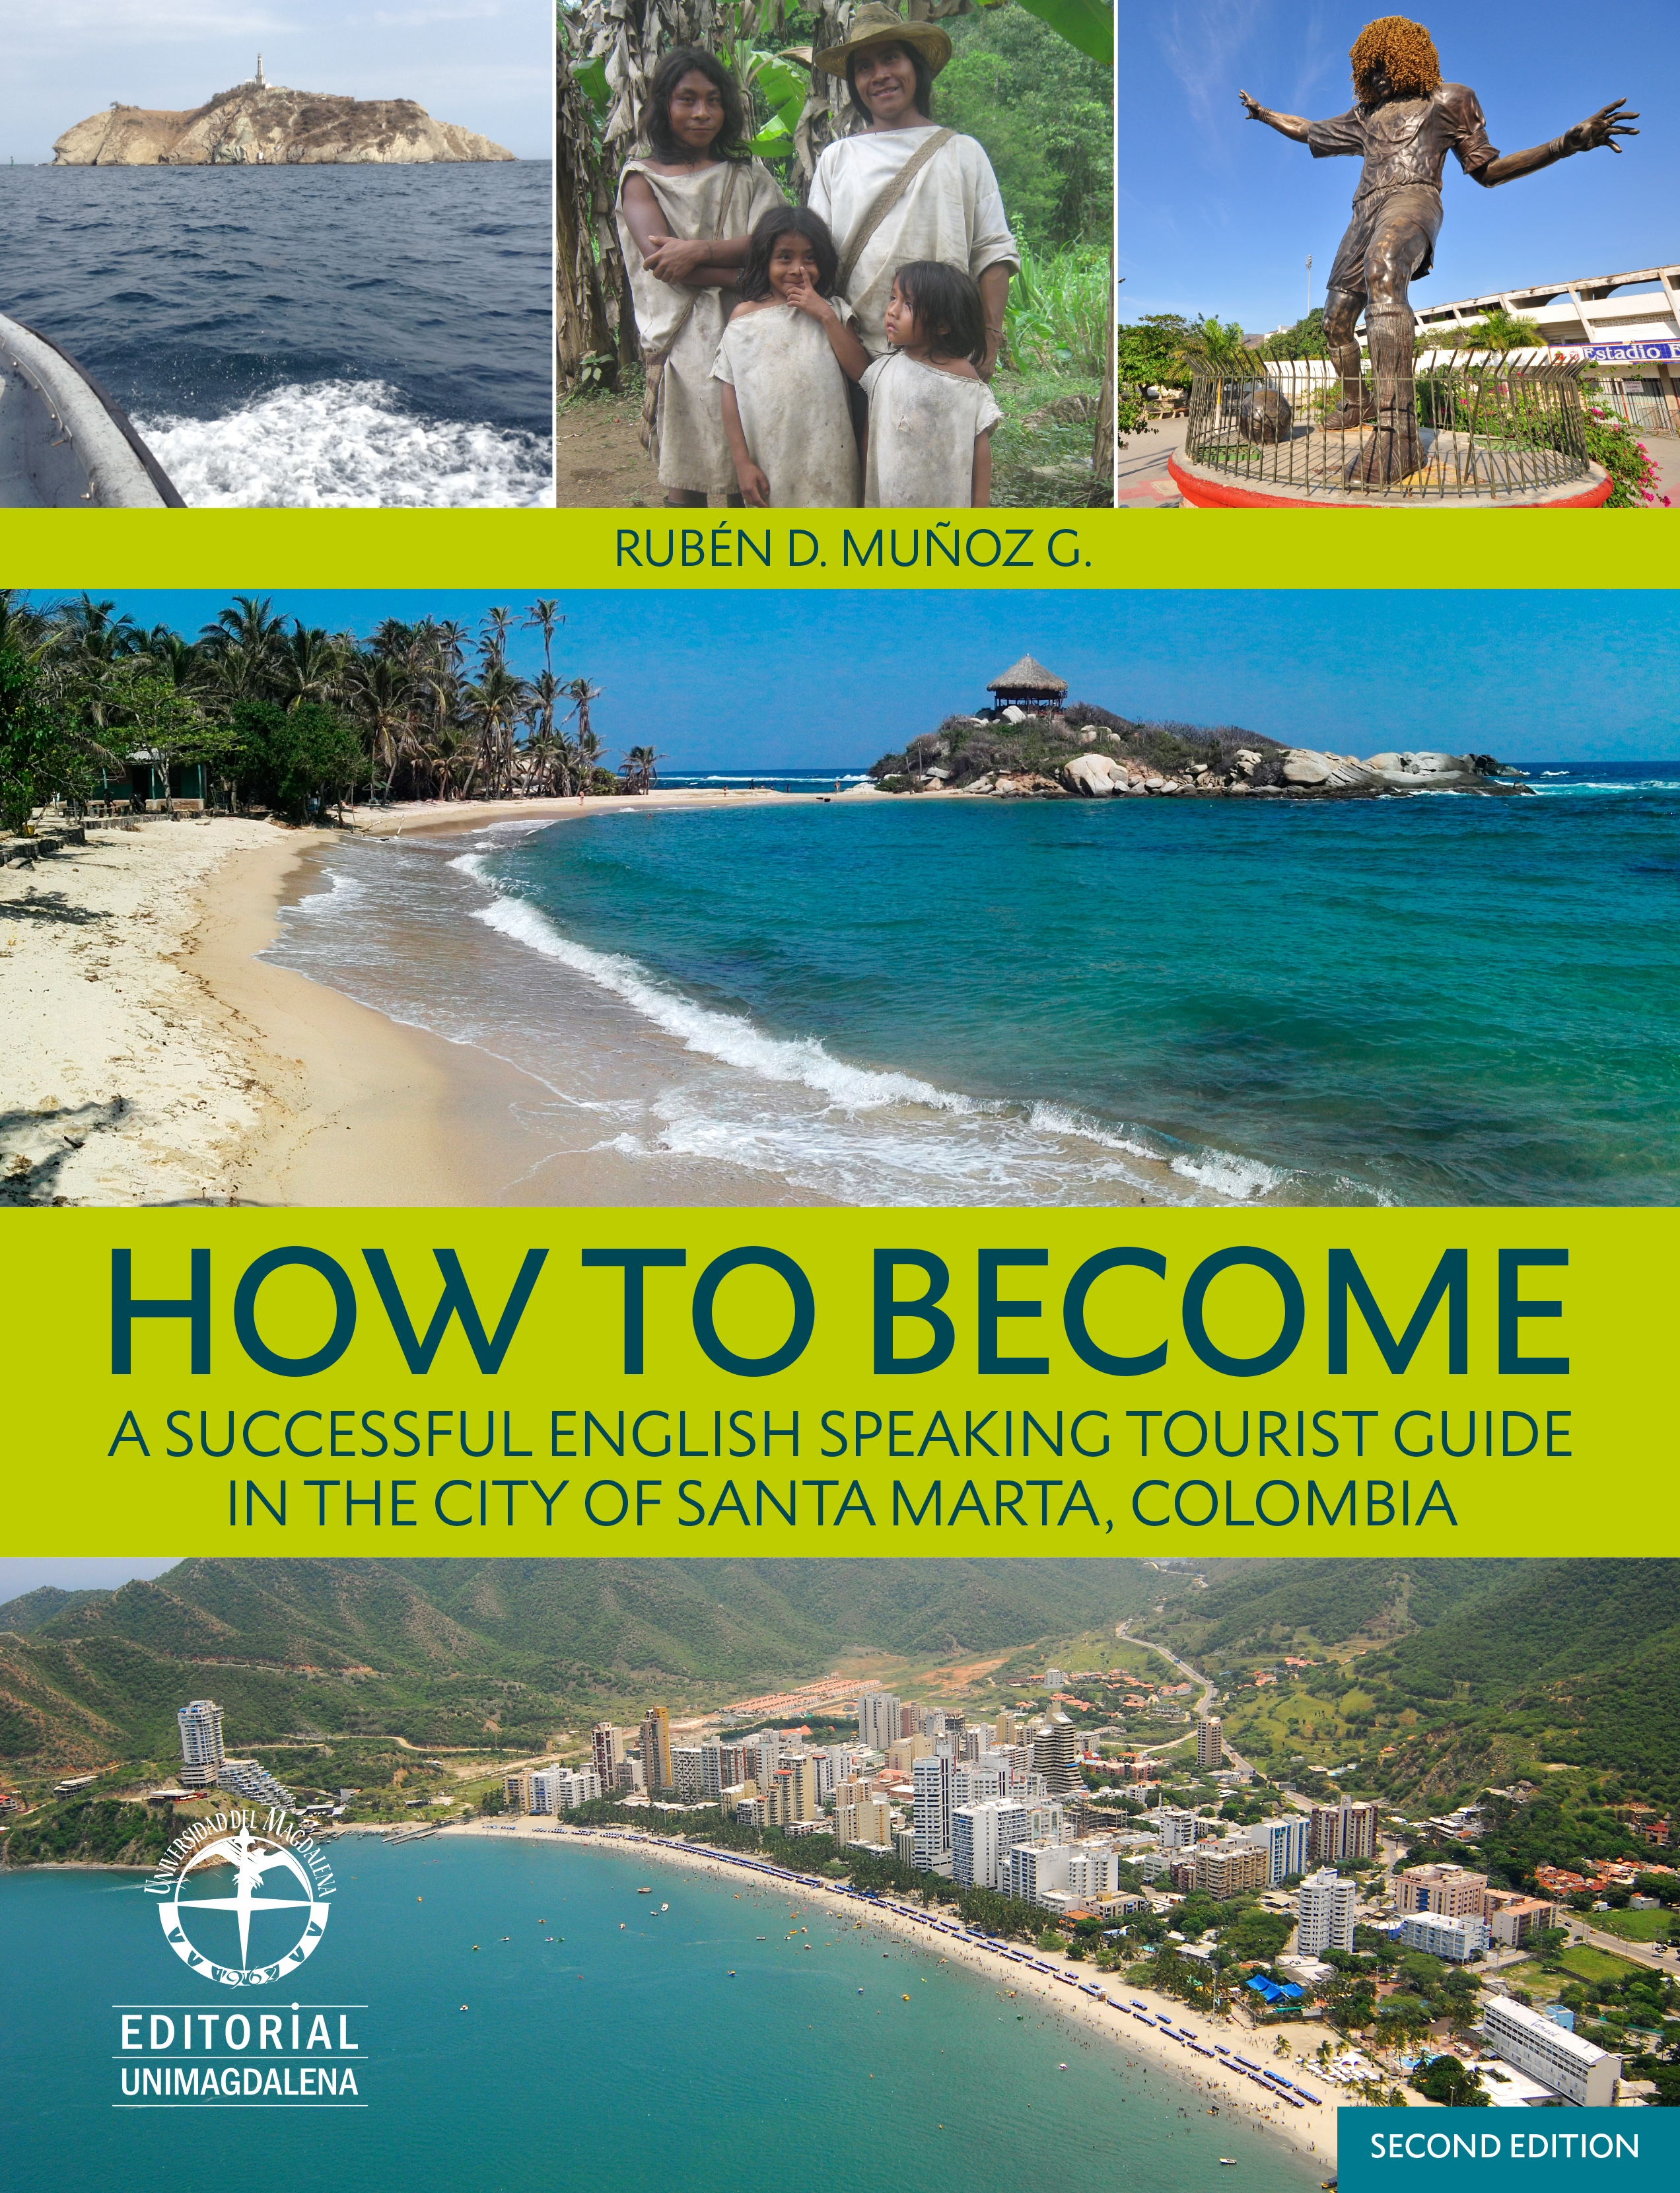 How To Become. A Successful English-Speaking Tourist Guide In Santa Marta